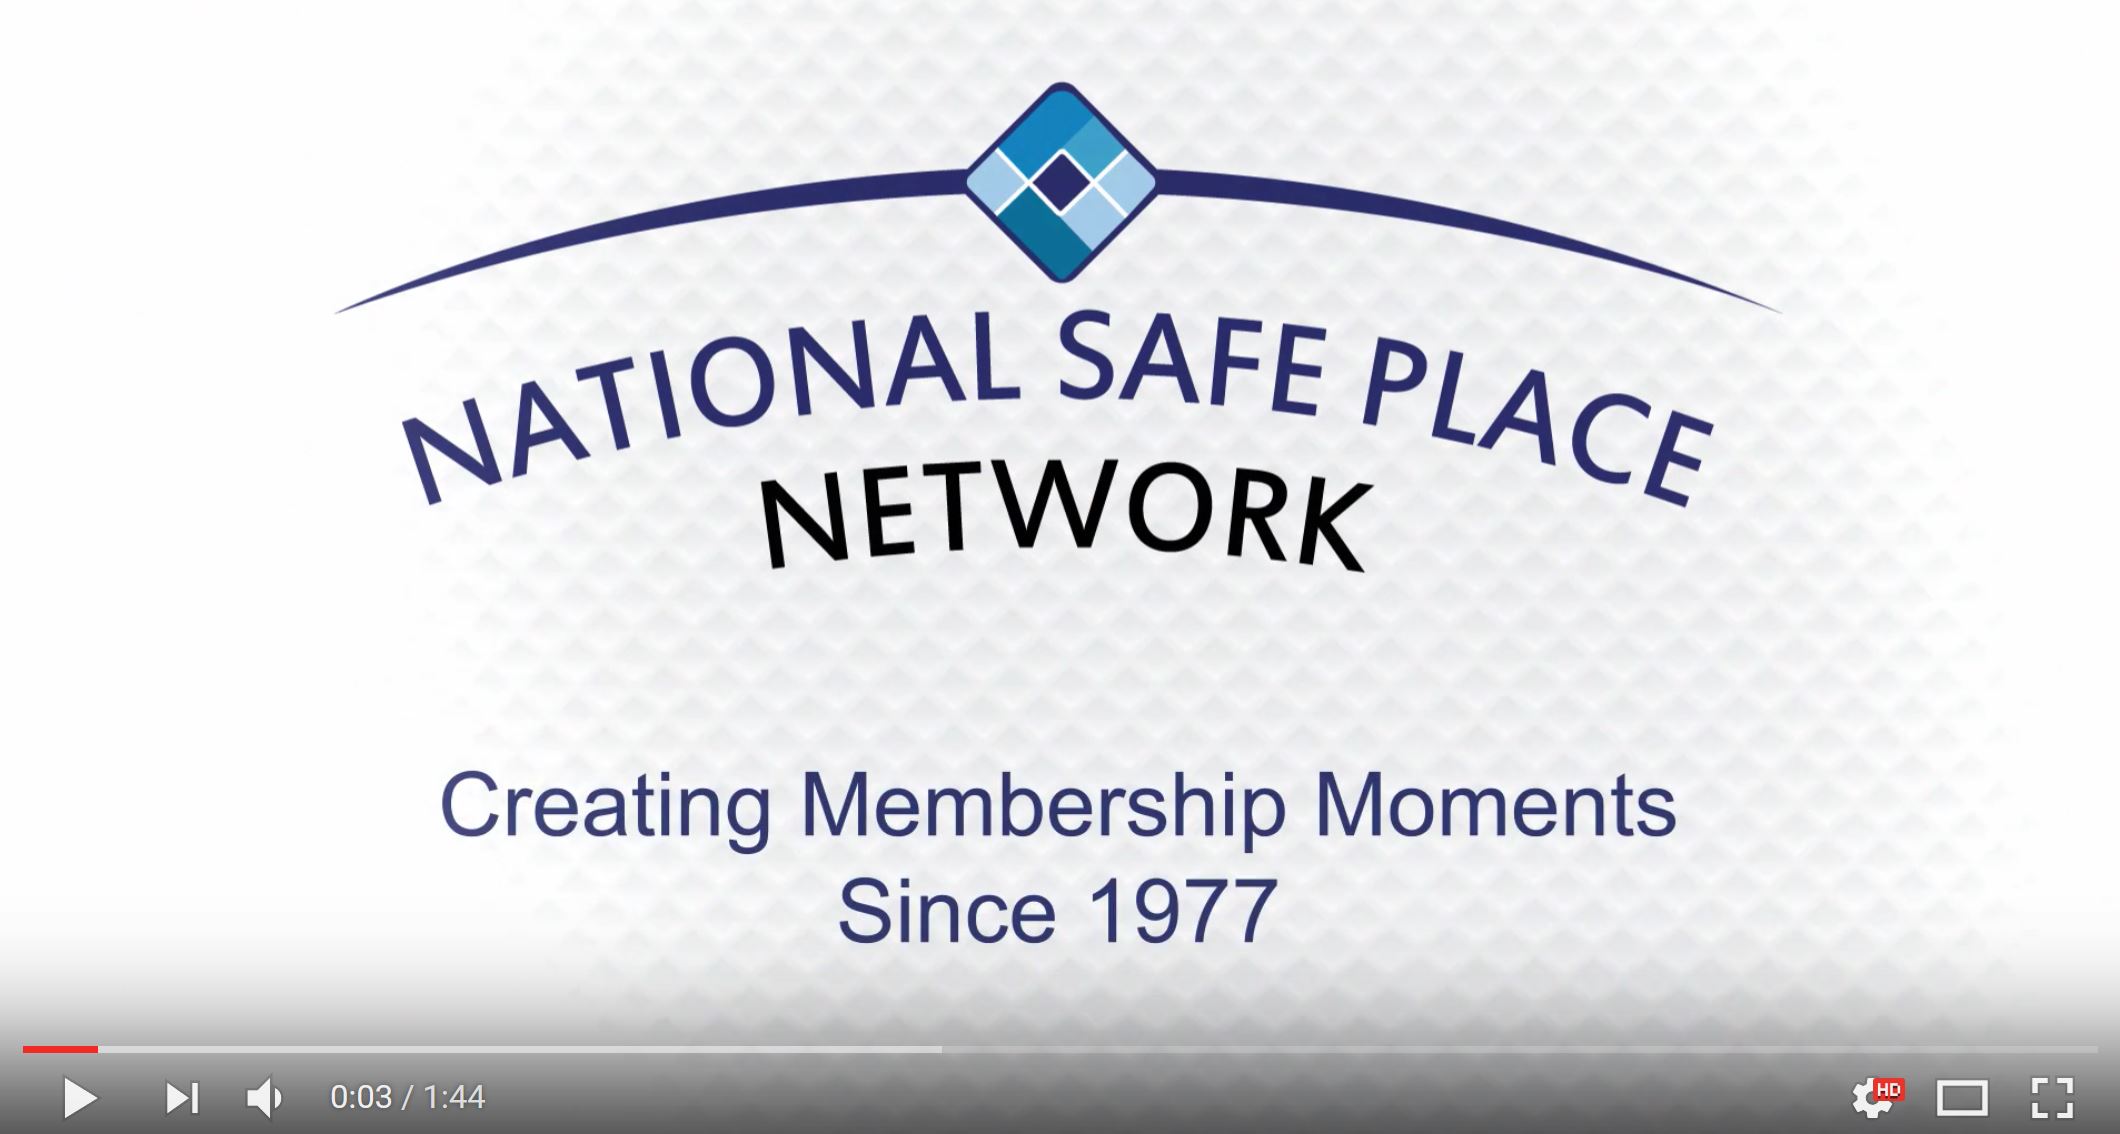 Image capture of the Membership Moments video from YouTube.